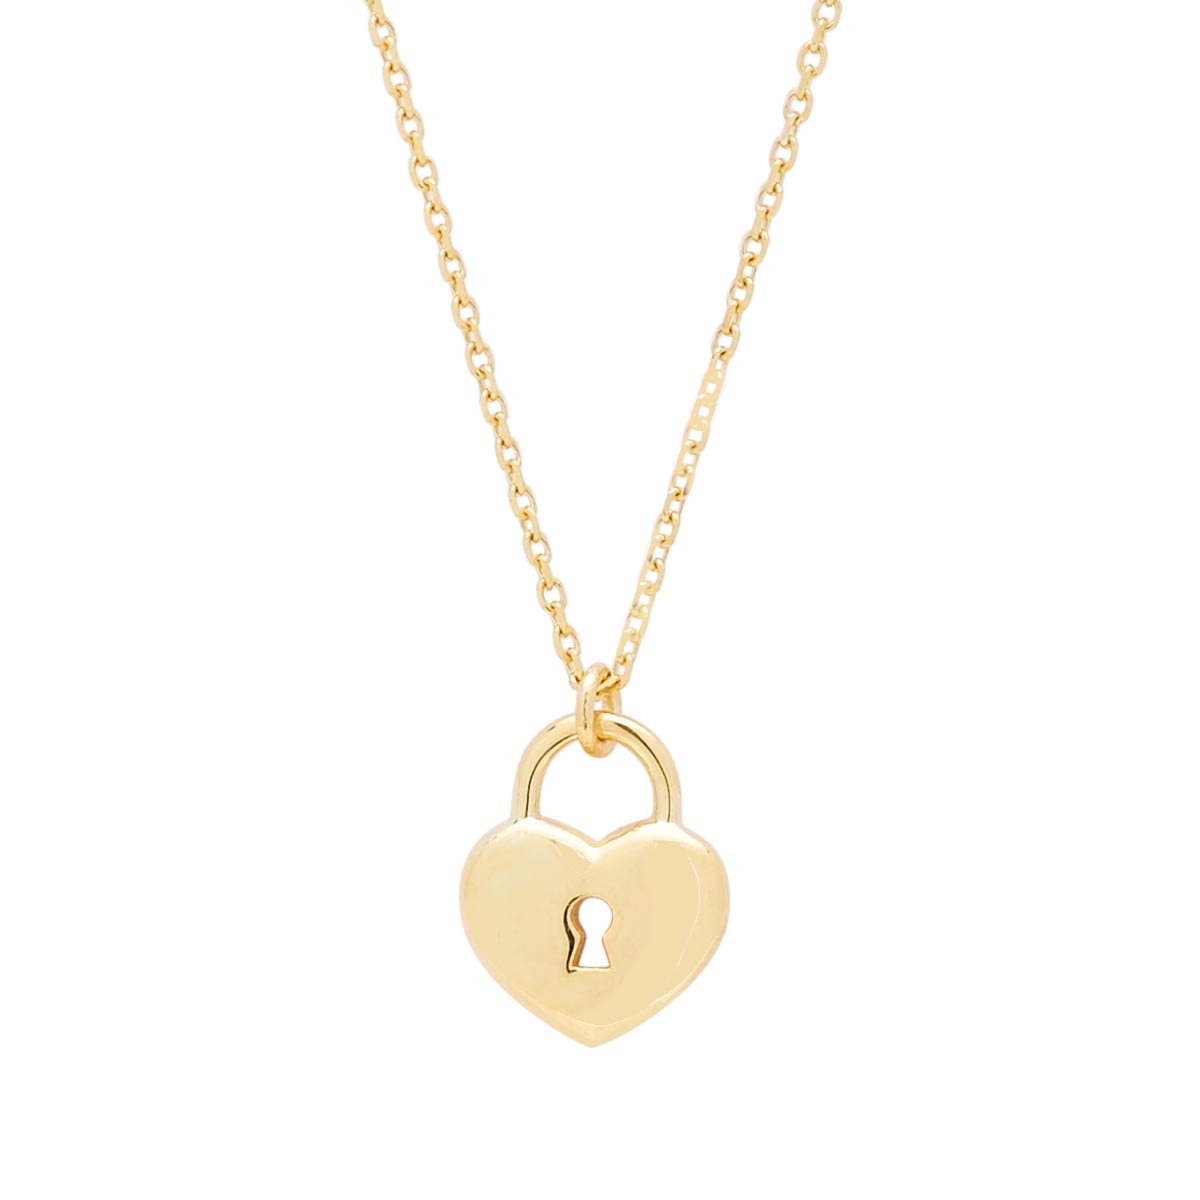 Heart Lock Necklace in 14kt Yellow Gold